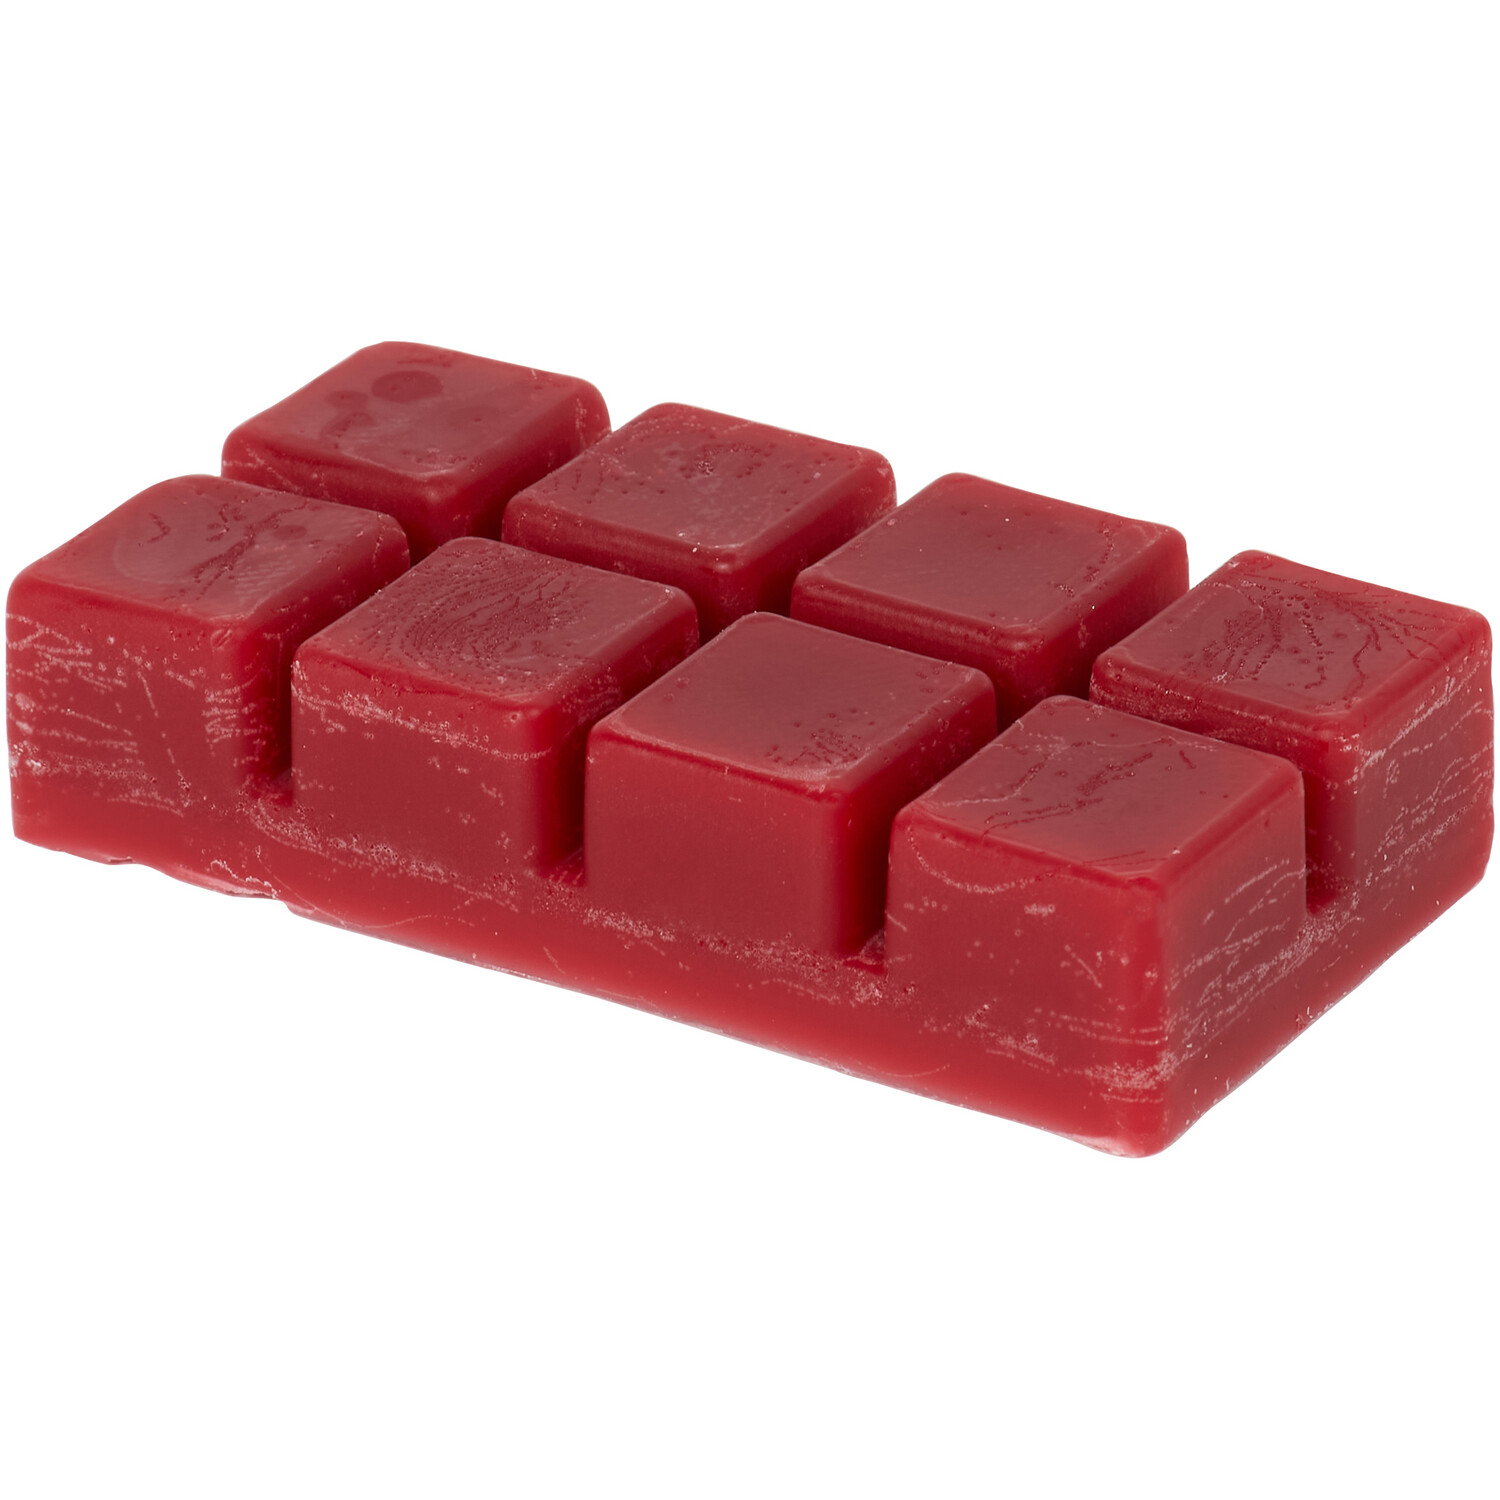 Assorted True Aroma Wax Melts - Red Image 3